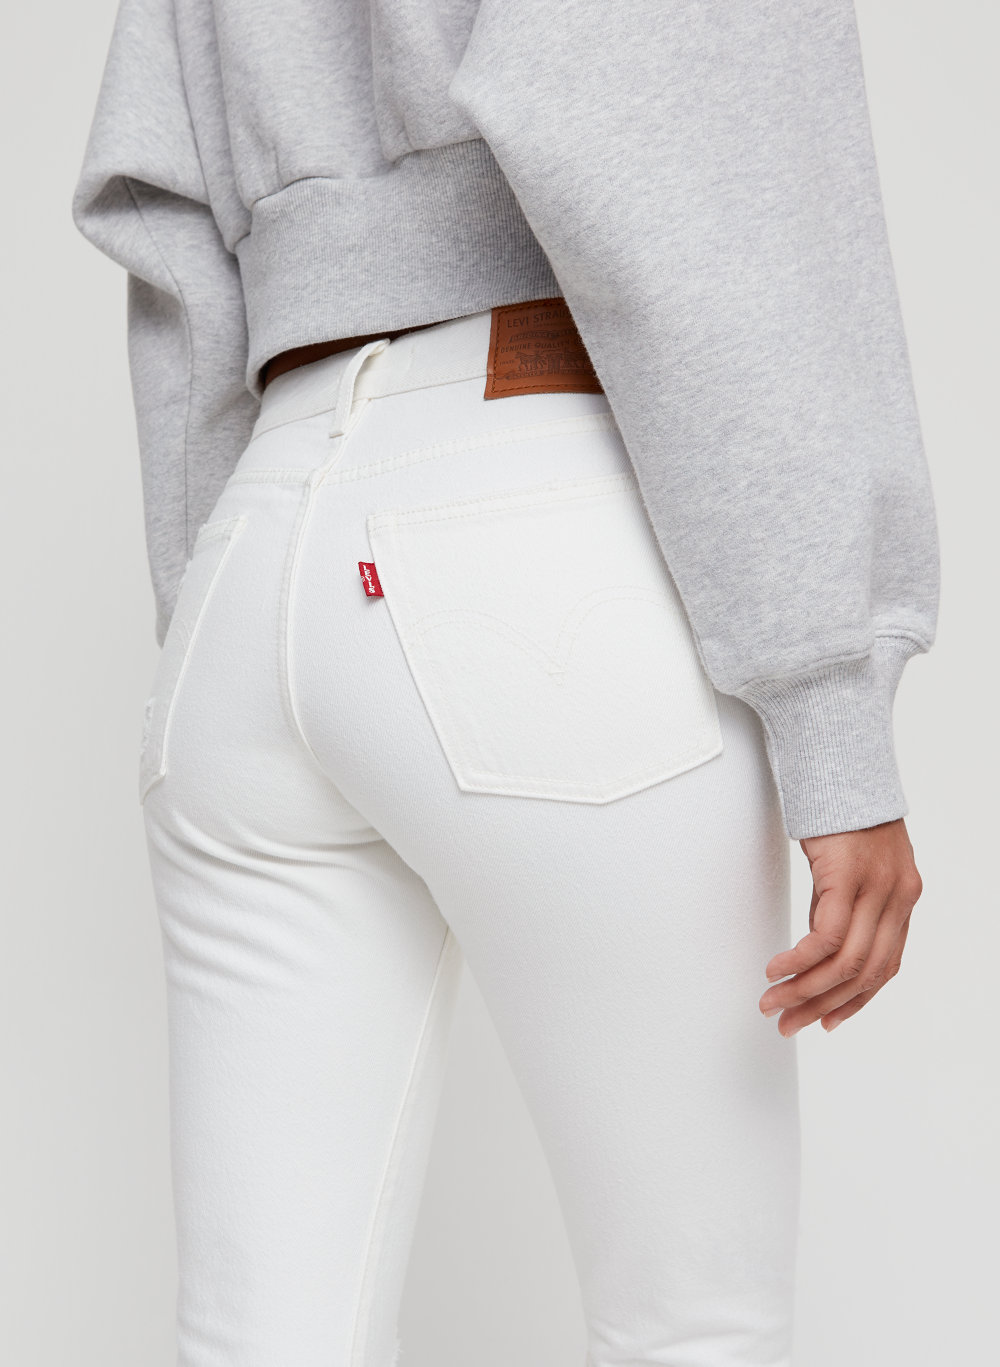 white wedgie jeans